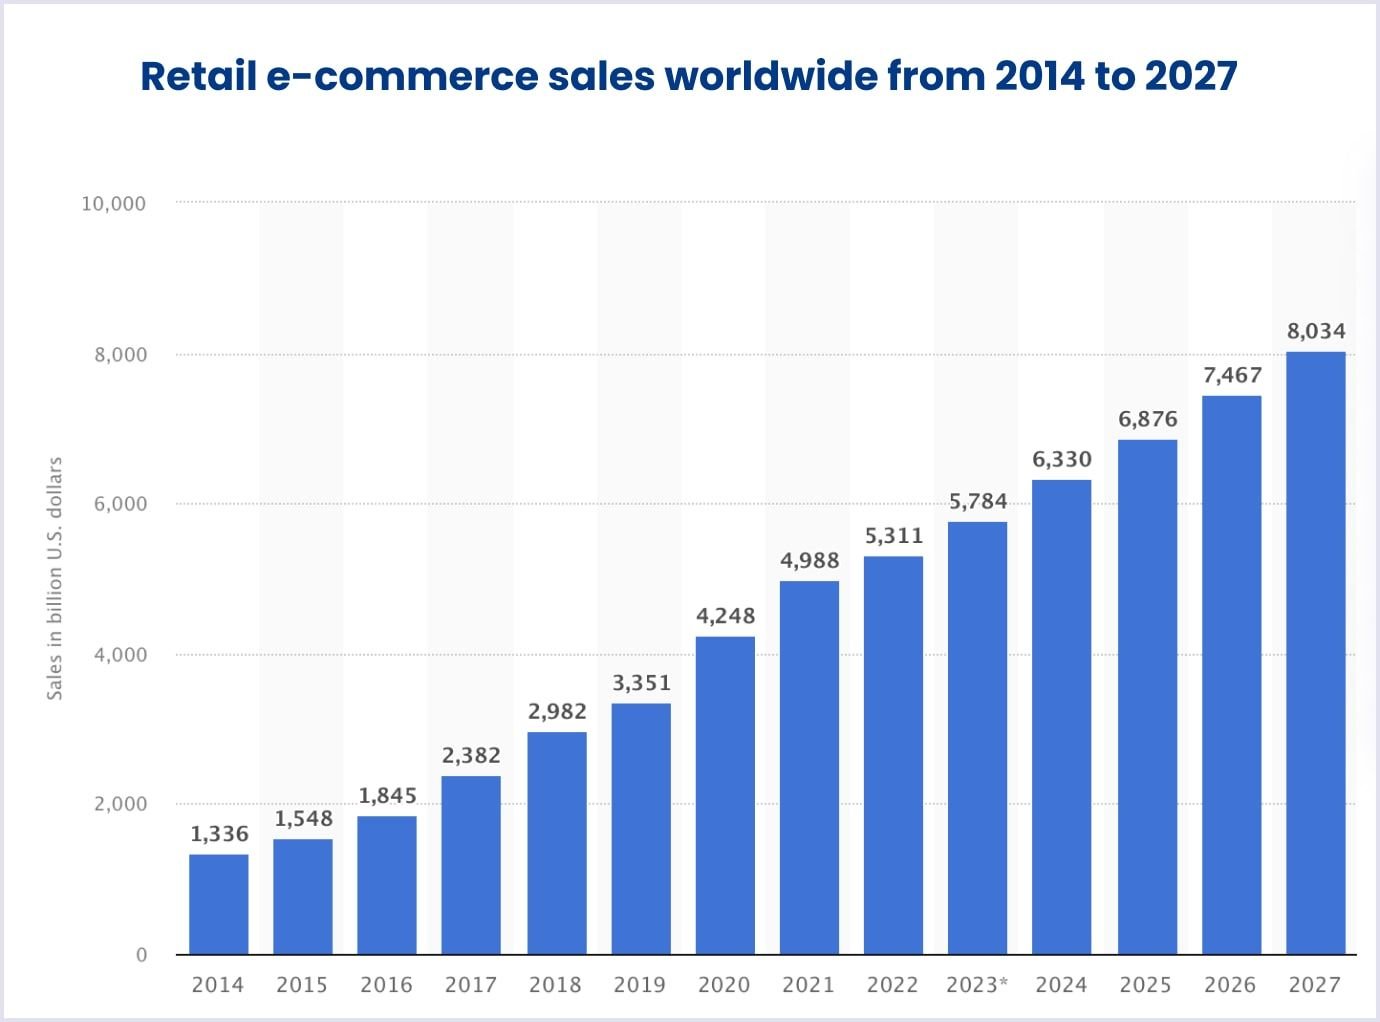 Retail e-commerce sales worldwide from 2014 to 2027